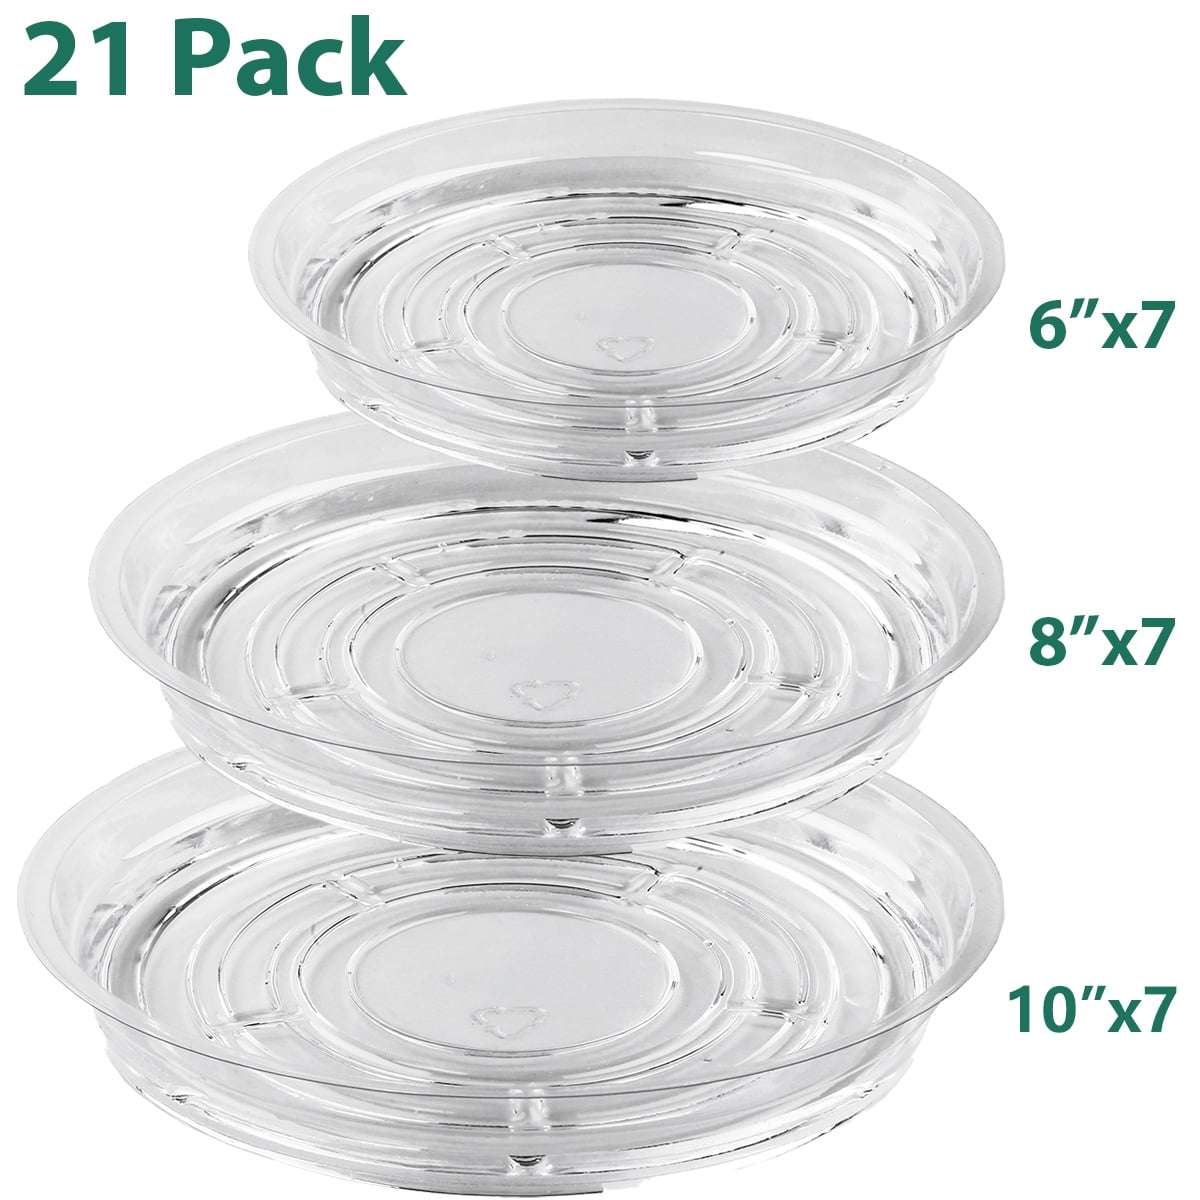 6"-15" Plant Pot Saucer Durable Plastic Plant Trays for Indoors Details about   MUDEELA 6 Pack 